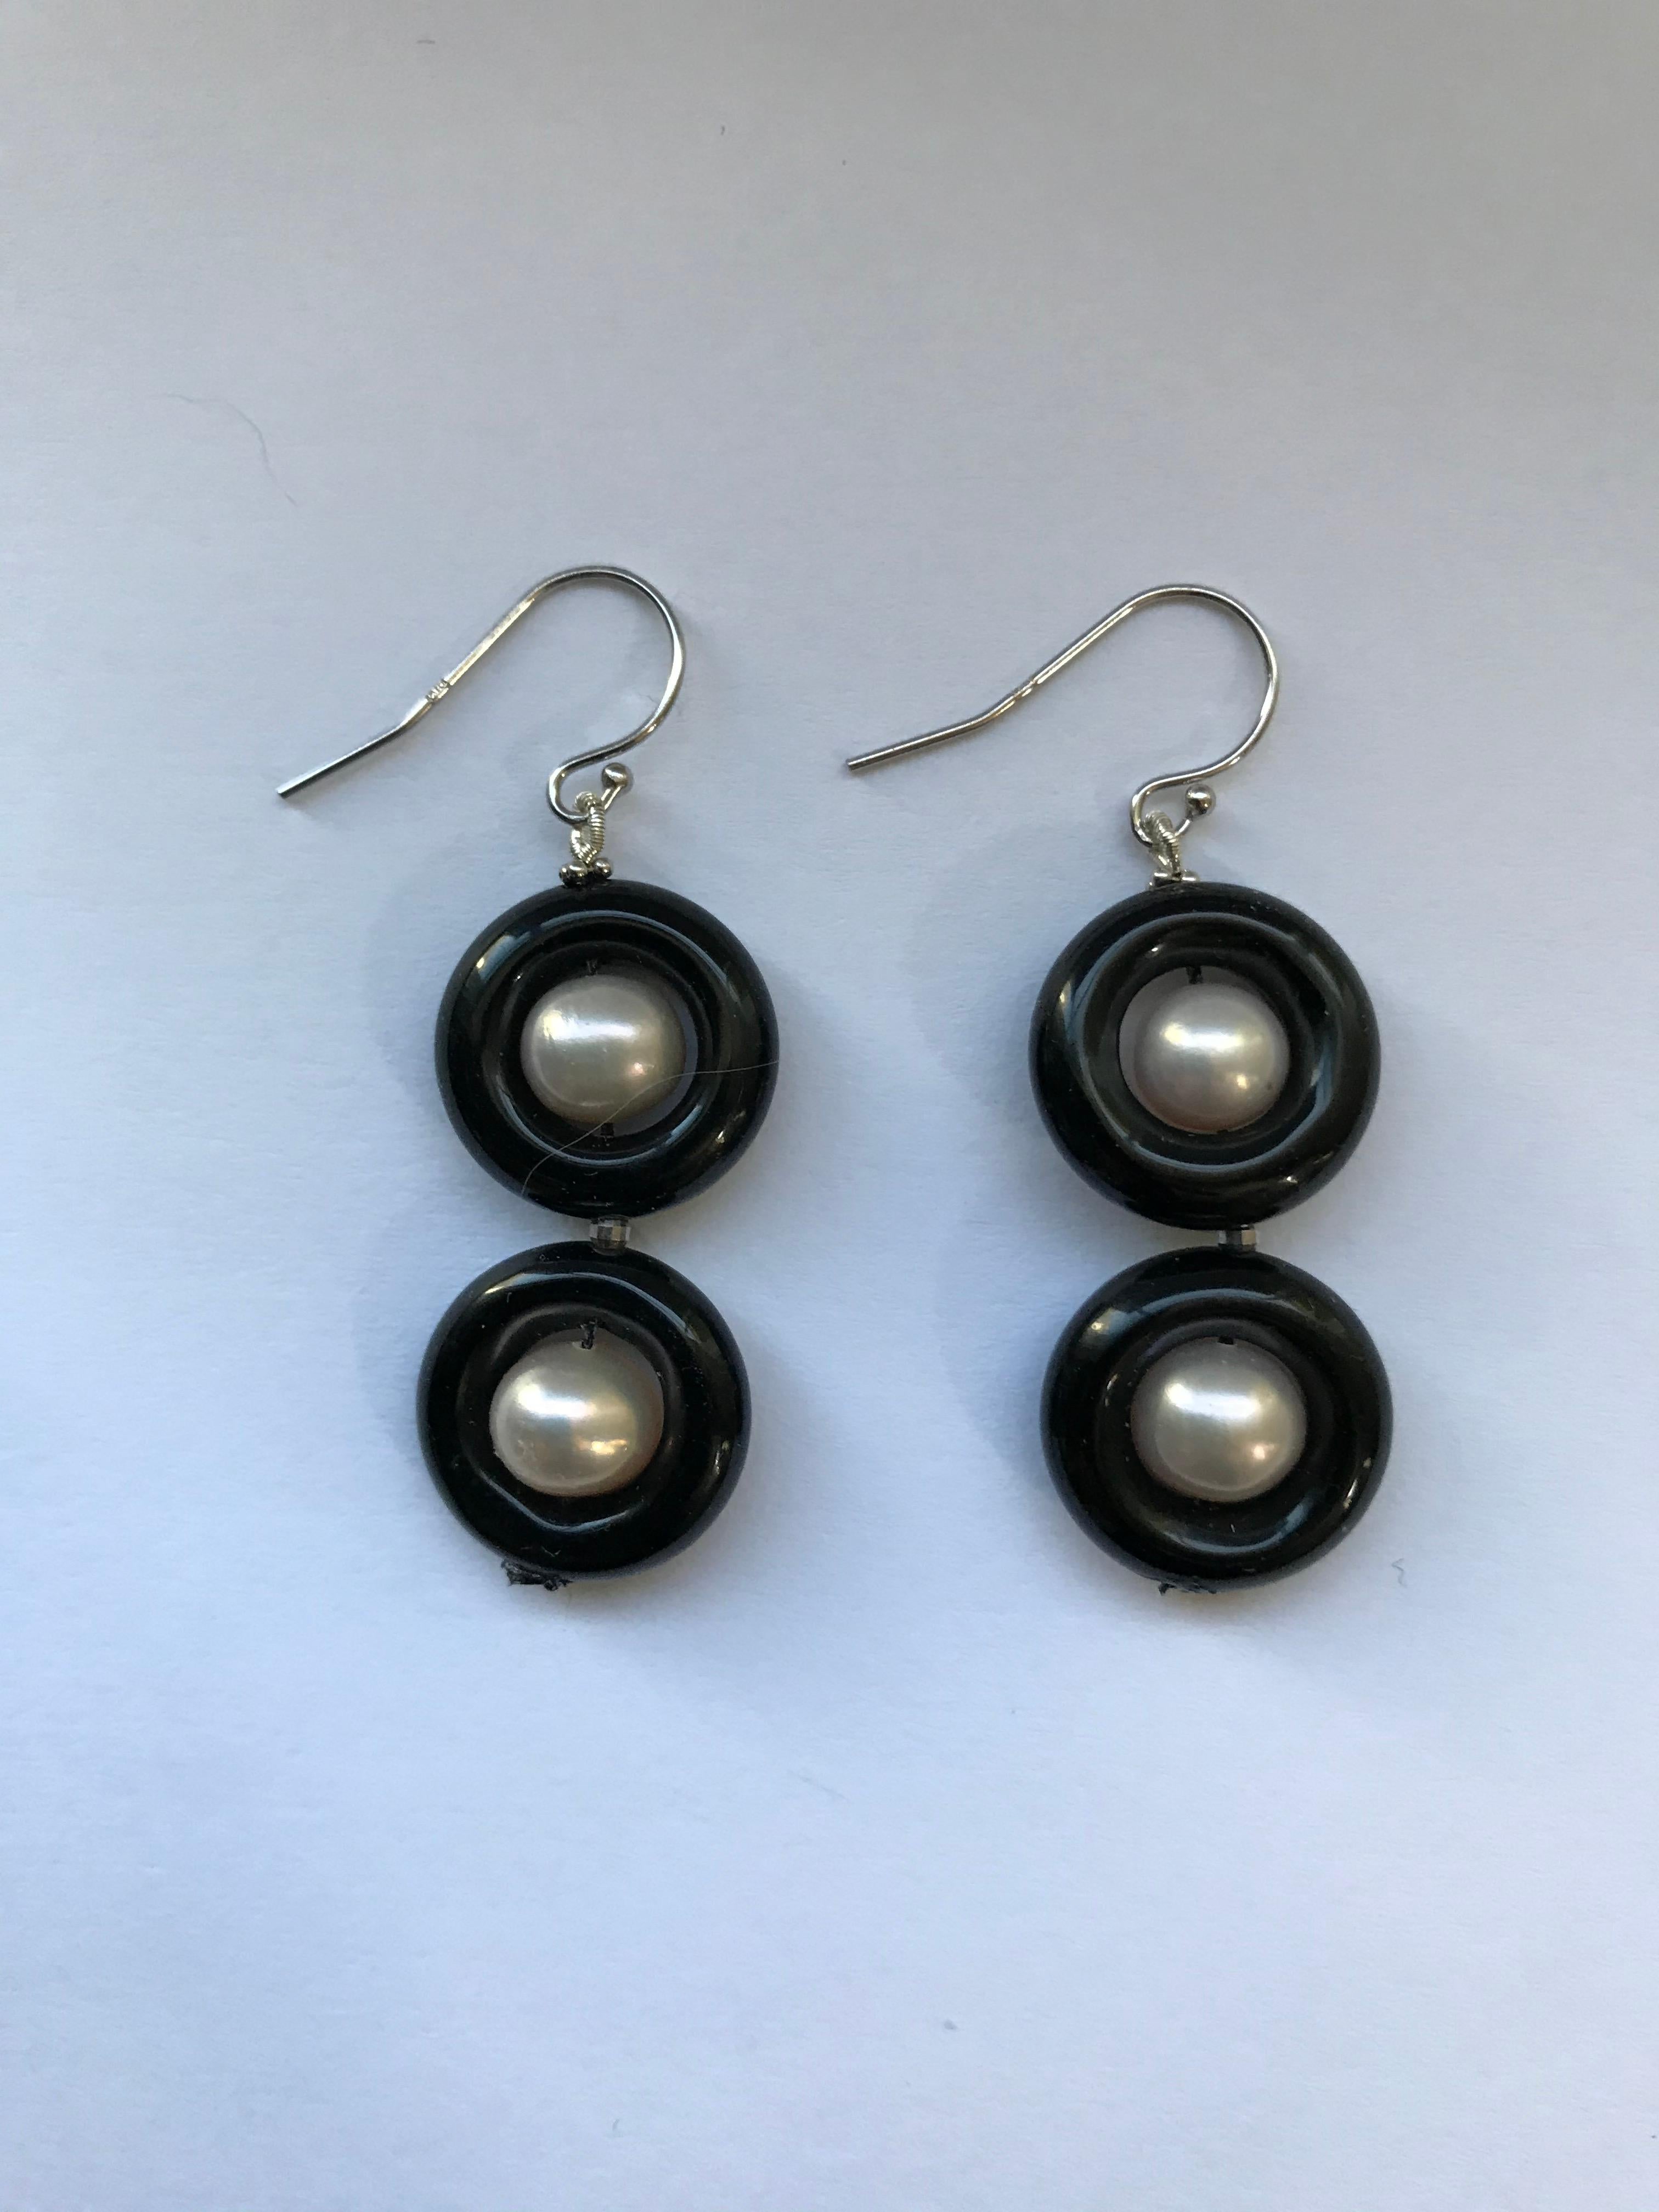 Artist Marina J. Double Onyx and Pearl Earrings with 14 Karat Yellow Gold Lever-Back